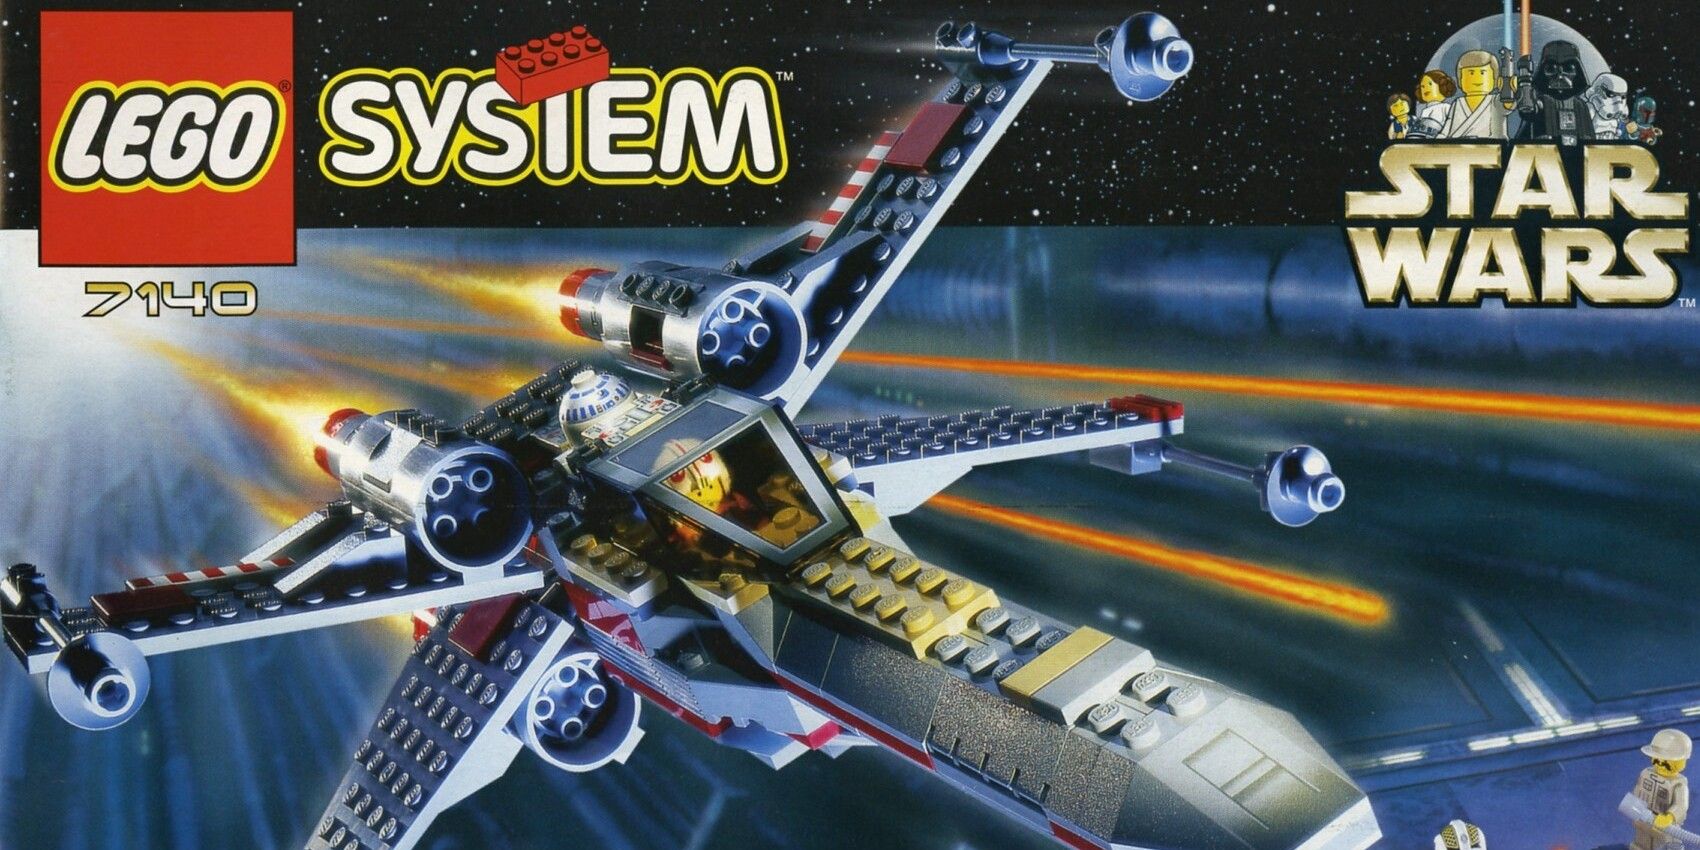 The original 7140 Lego X-Wing boxed set